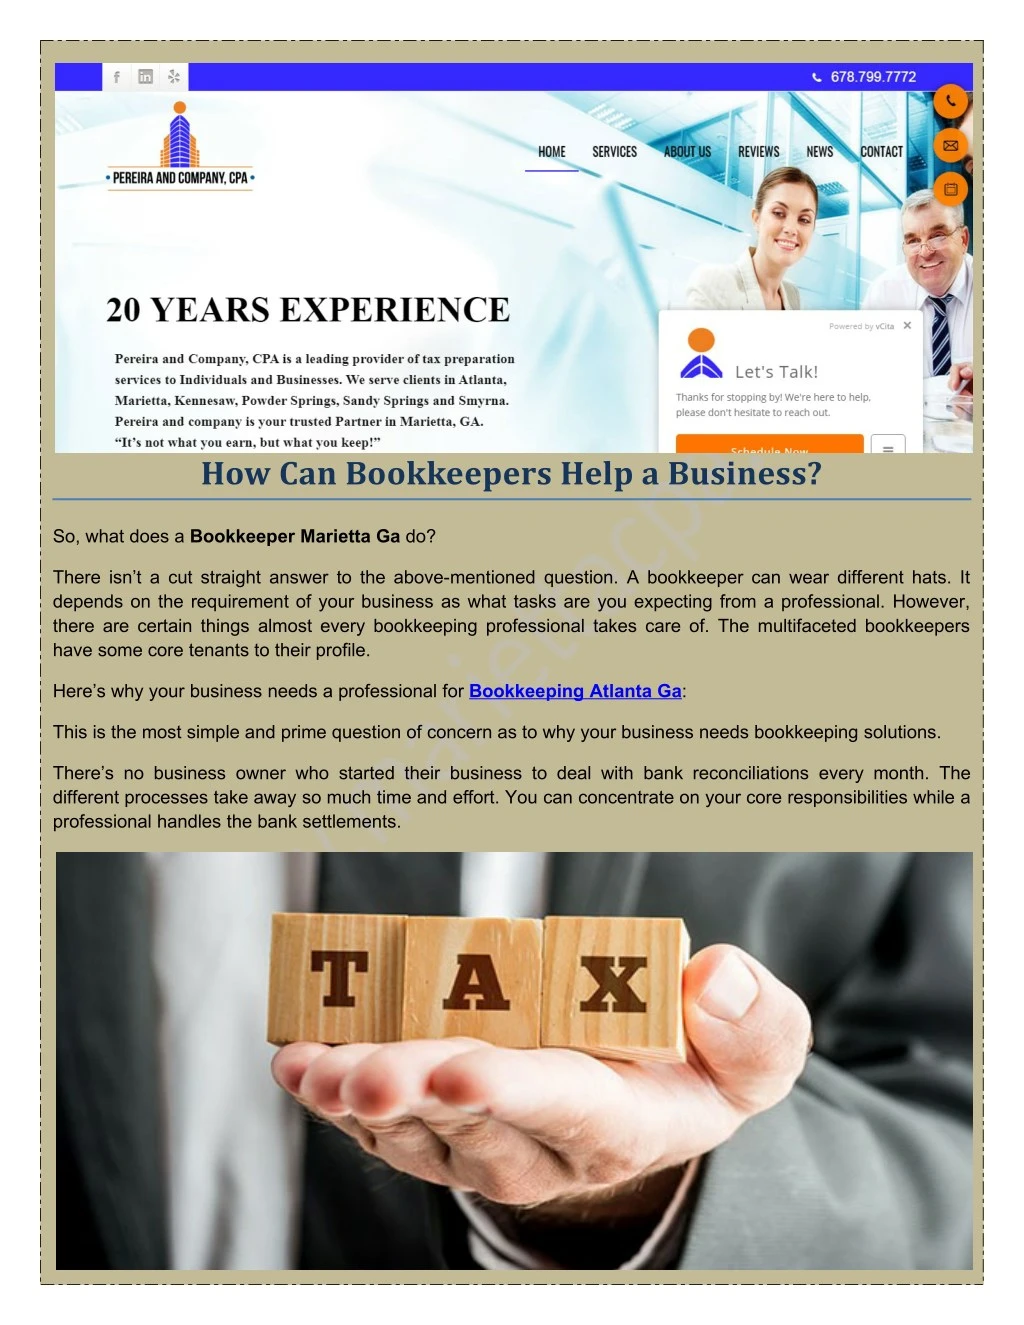 how can bookkeepers help a business